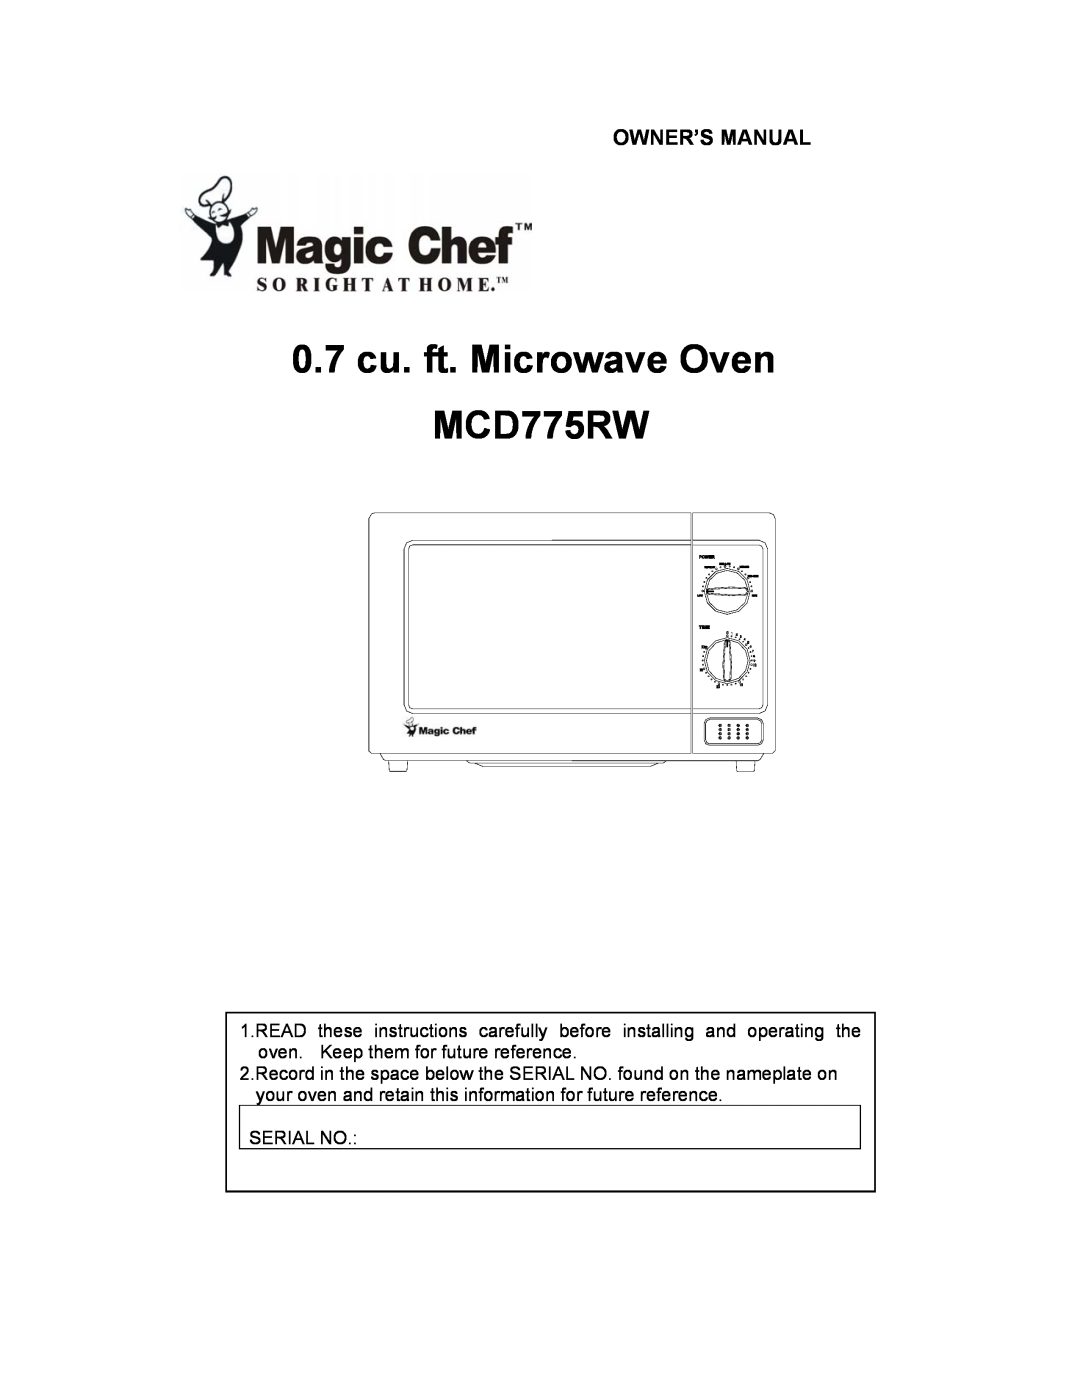 Magic Chef owner manual 0.7cu. ft. Microwave Oven MCD775RW 